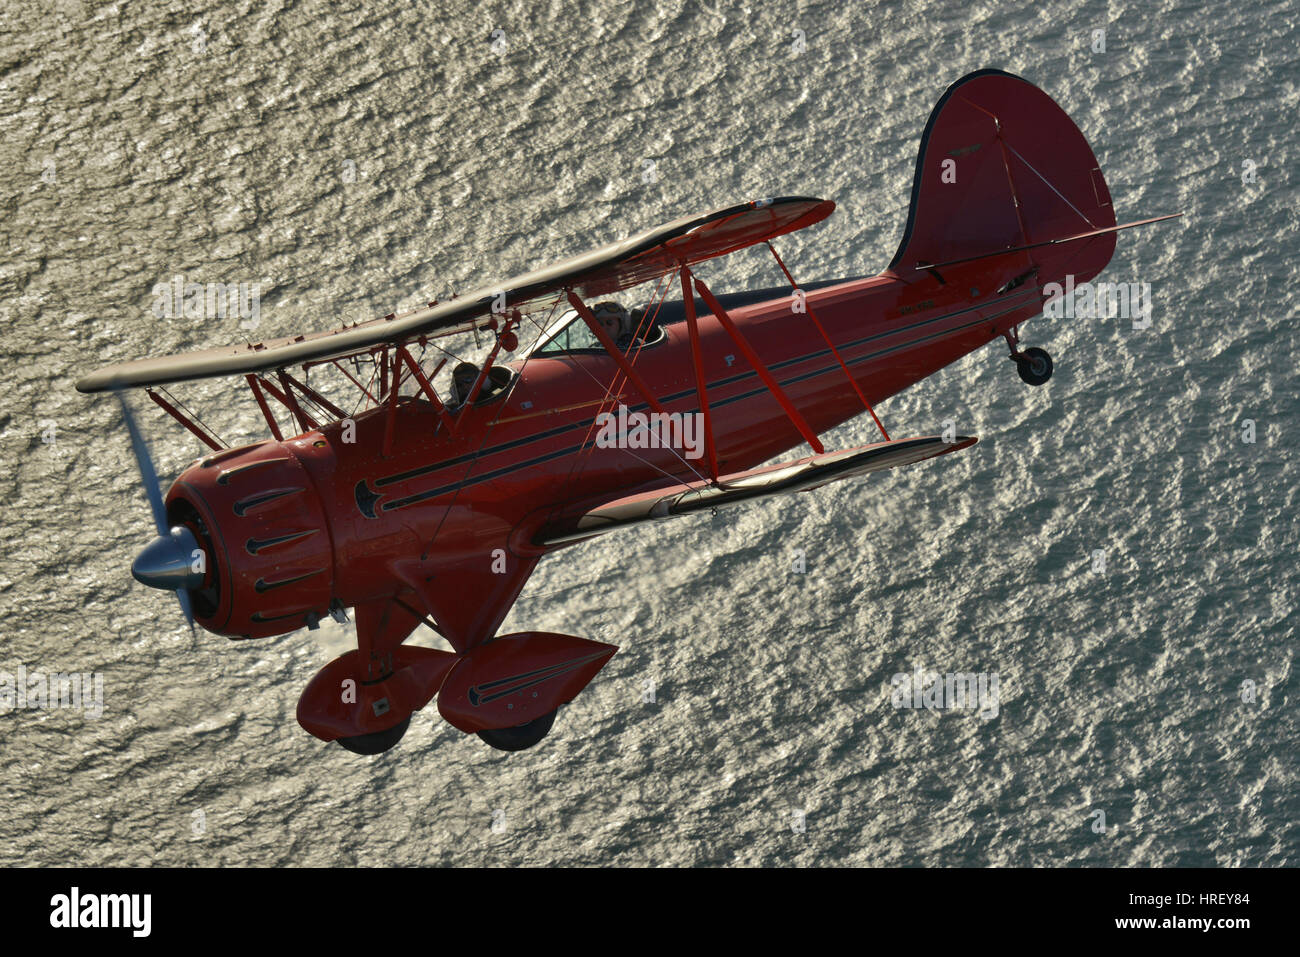 An air to air portrait of a Red Waco YMF-F5C biplane over the ocean, Western Australia. Stock Photo